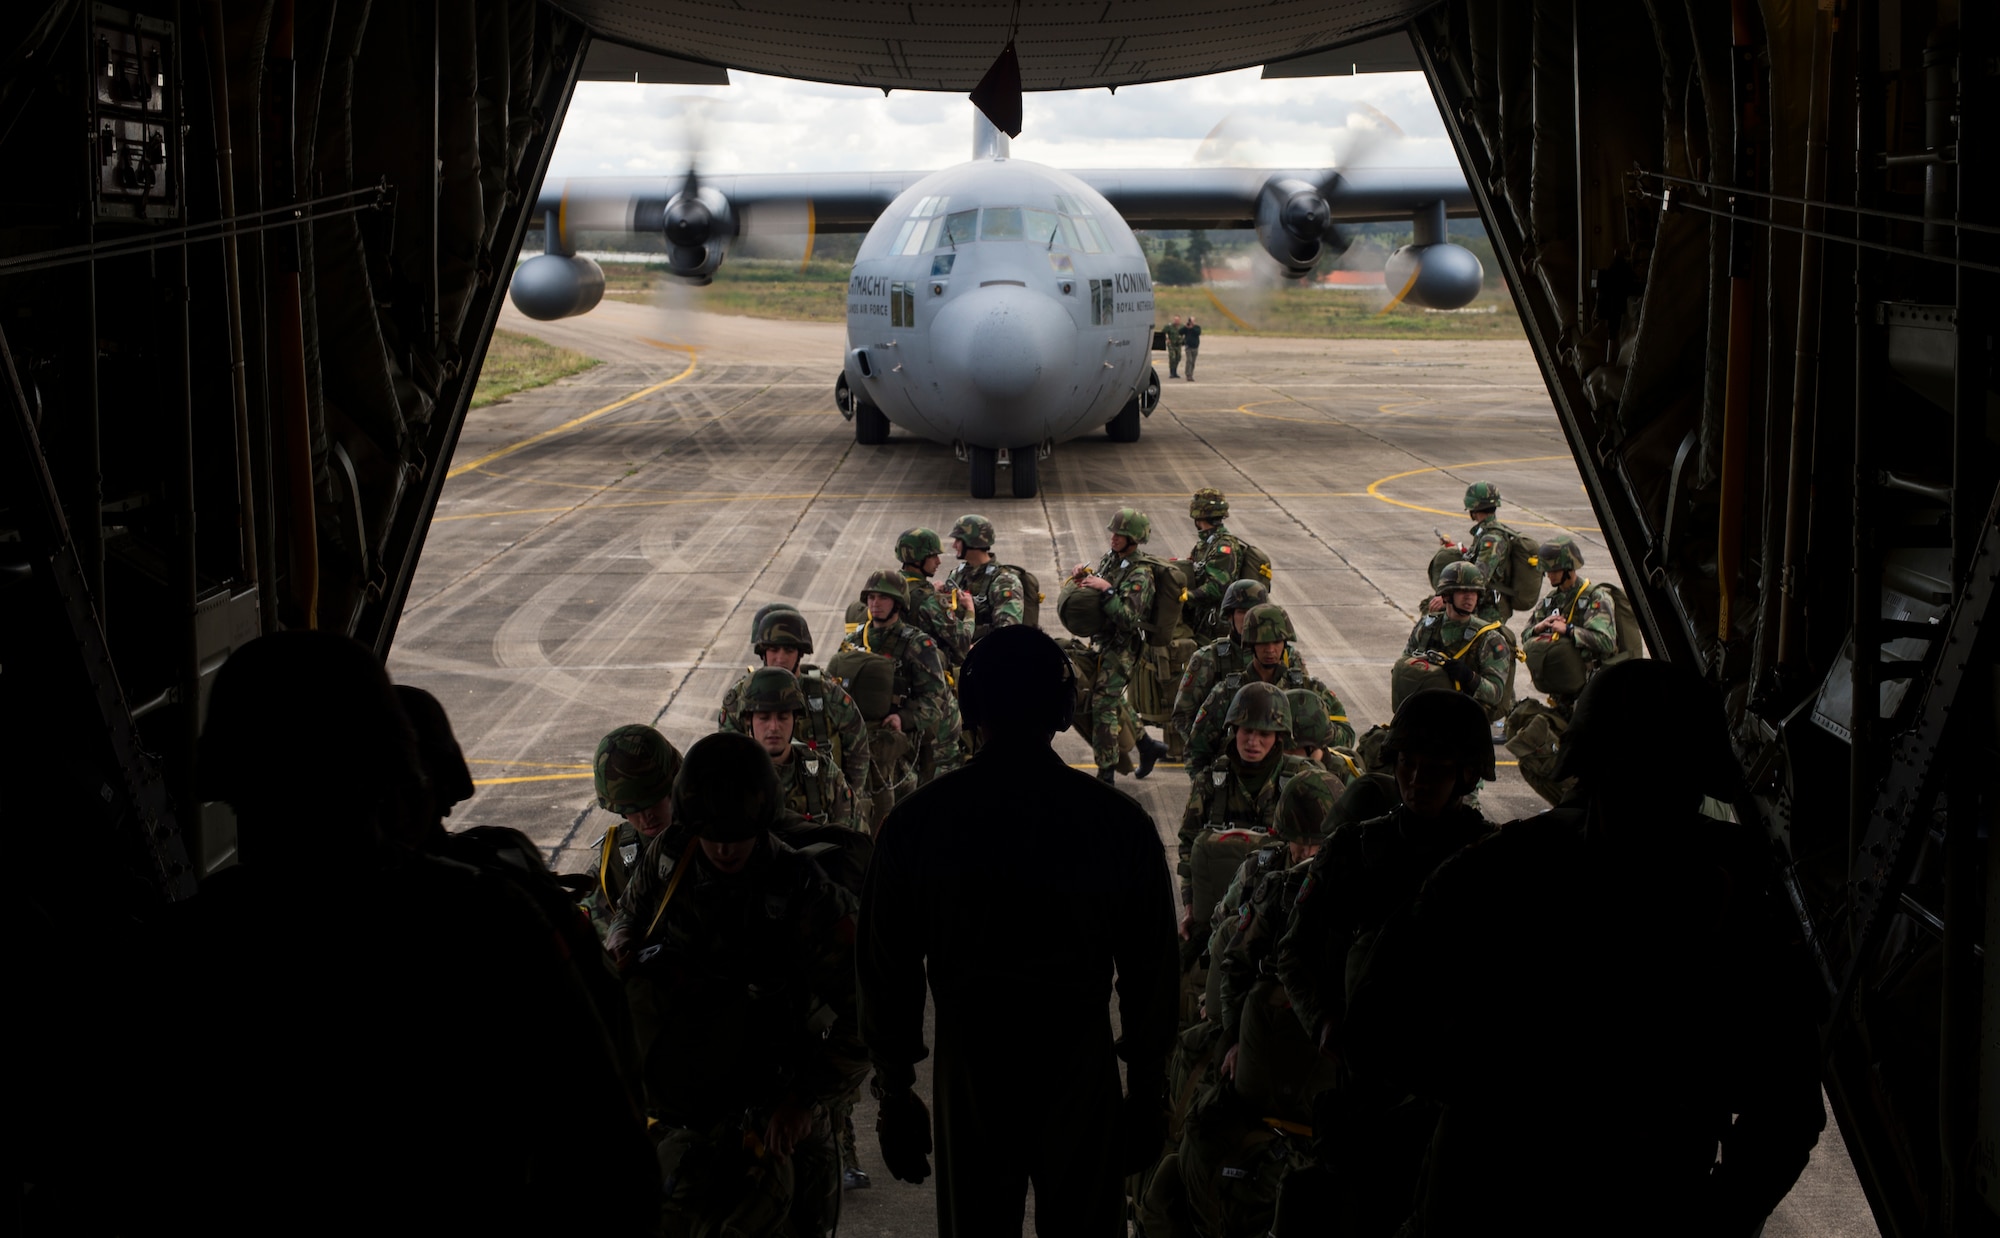 Portuguese paratroopers load onto a C-130J Super Hercules assigned to the 37th Airlift Squadron anda C-130H Hercules assigned to the Netherland air force during exercise Real Thaw 16 in Beja, Portugal, Feb. 25, 2016. The U.S. worked alongside the Royal Netherlands air force to airdrop more than 100 paratroopers. (U.S. Air Force photo/Senior Airman Jonathan Stefanko)